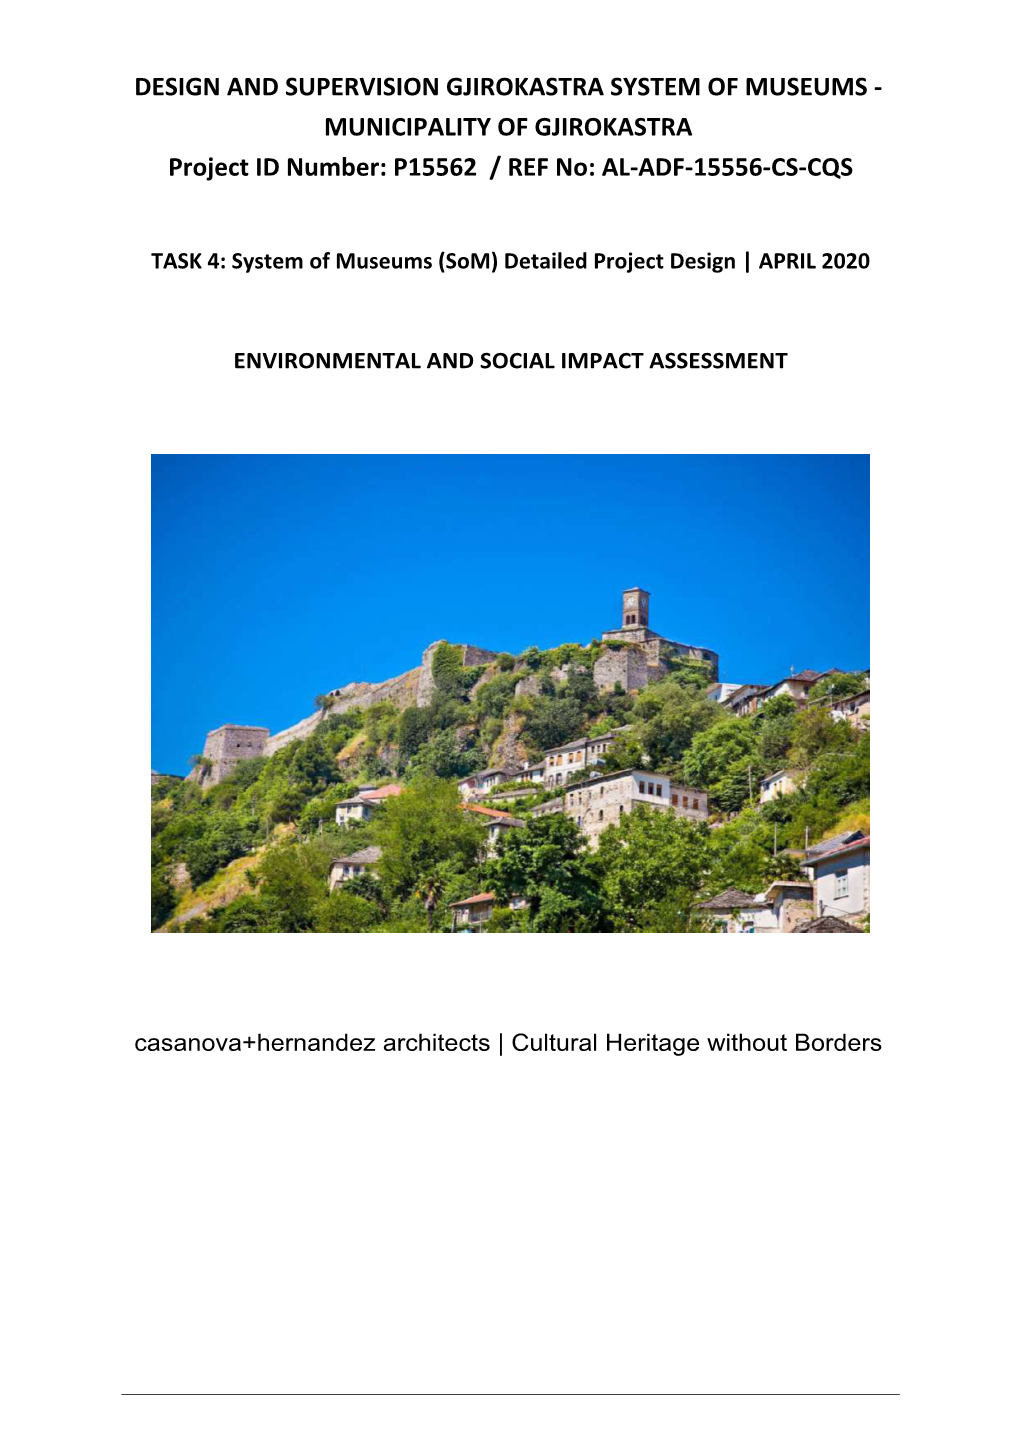 DESIGN and SUPERVISION GJIROKASTRA SYSTEM of MUSEUMS ‐ MUNICIPALITY of GJIROKASTRA Project ID Number: P15562 / REF No: AL‐ADF‐15556‐CS‐CQS